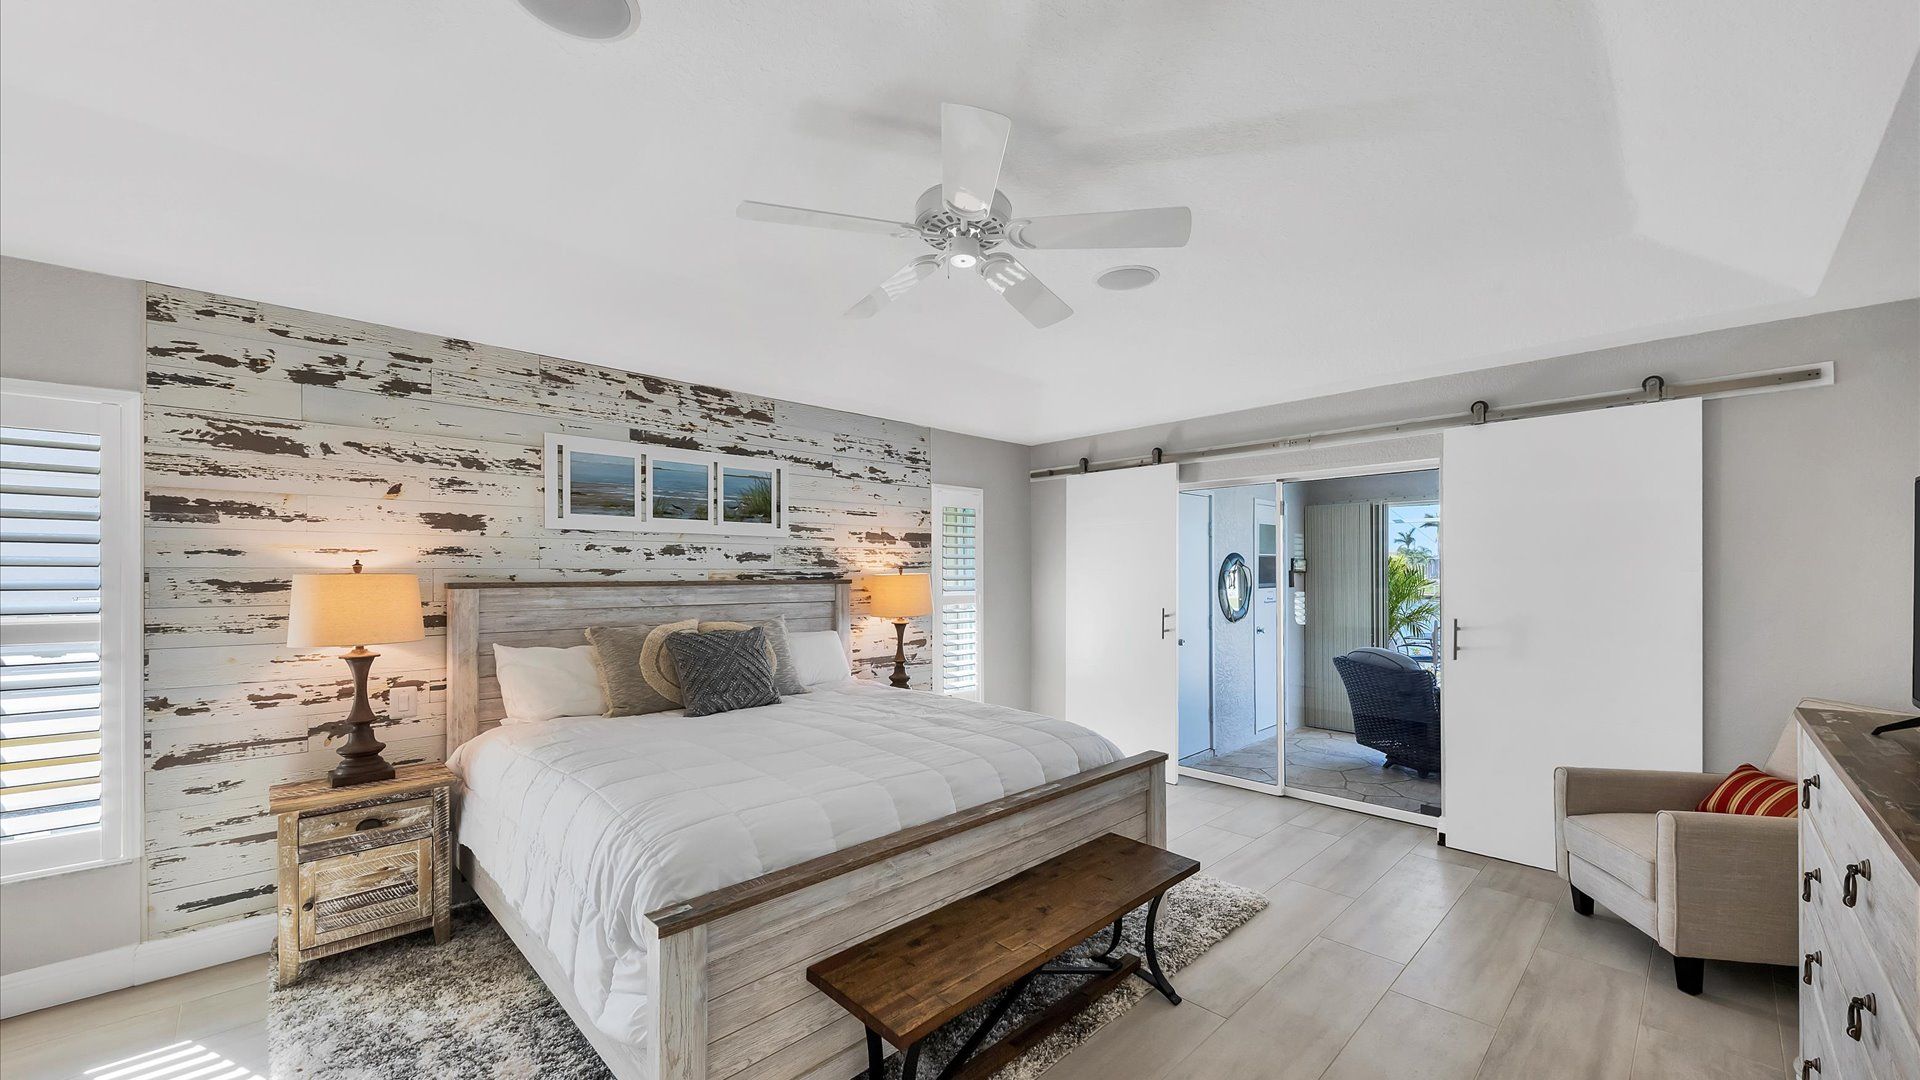 Gorgeous master bedroom with king bed and lanai access